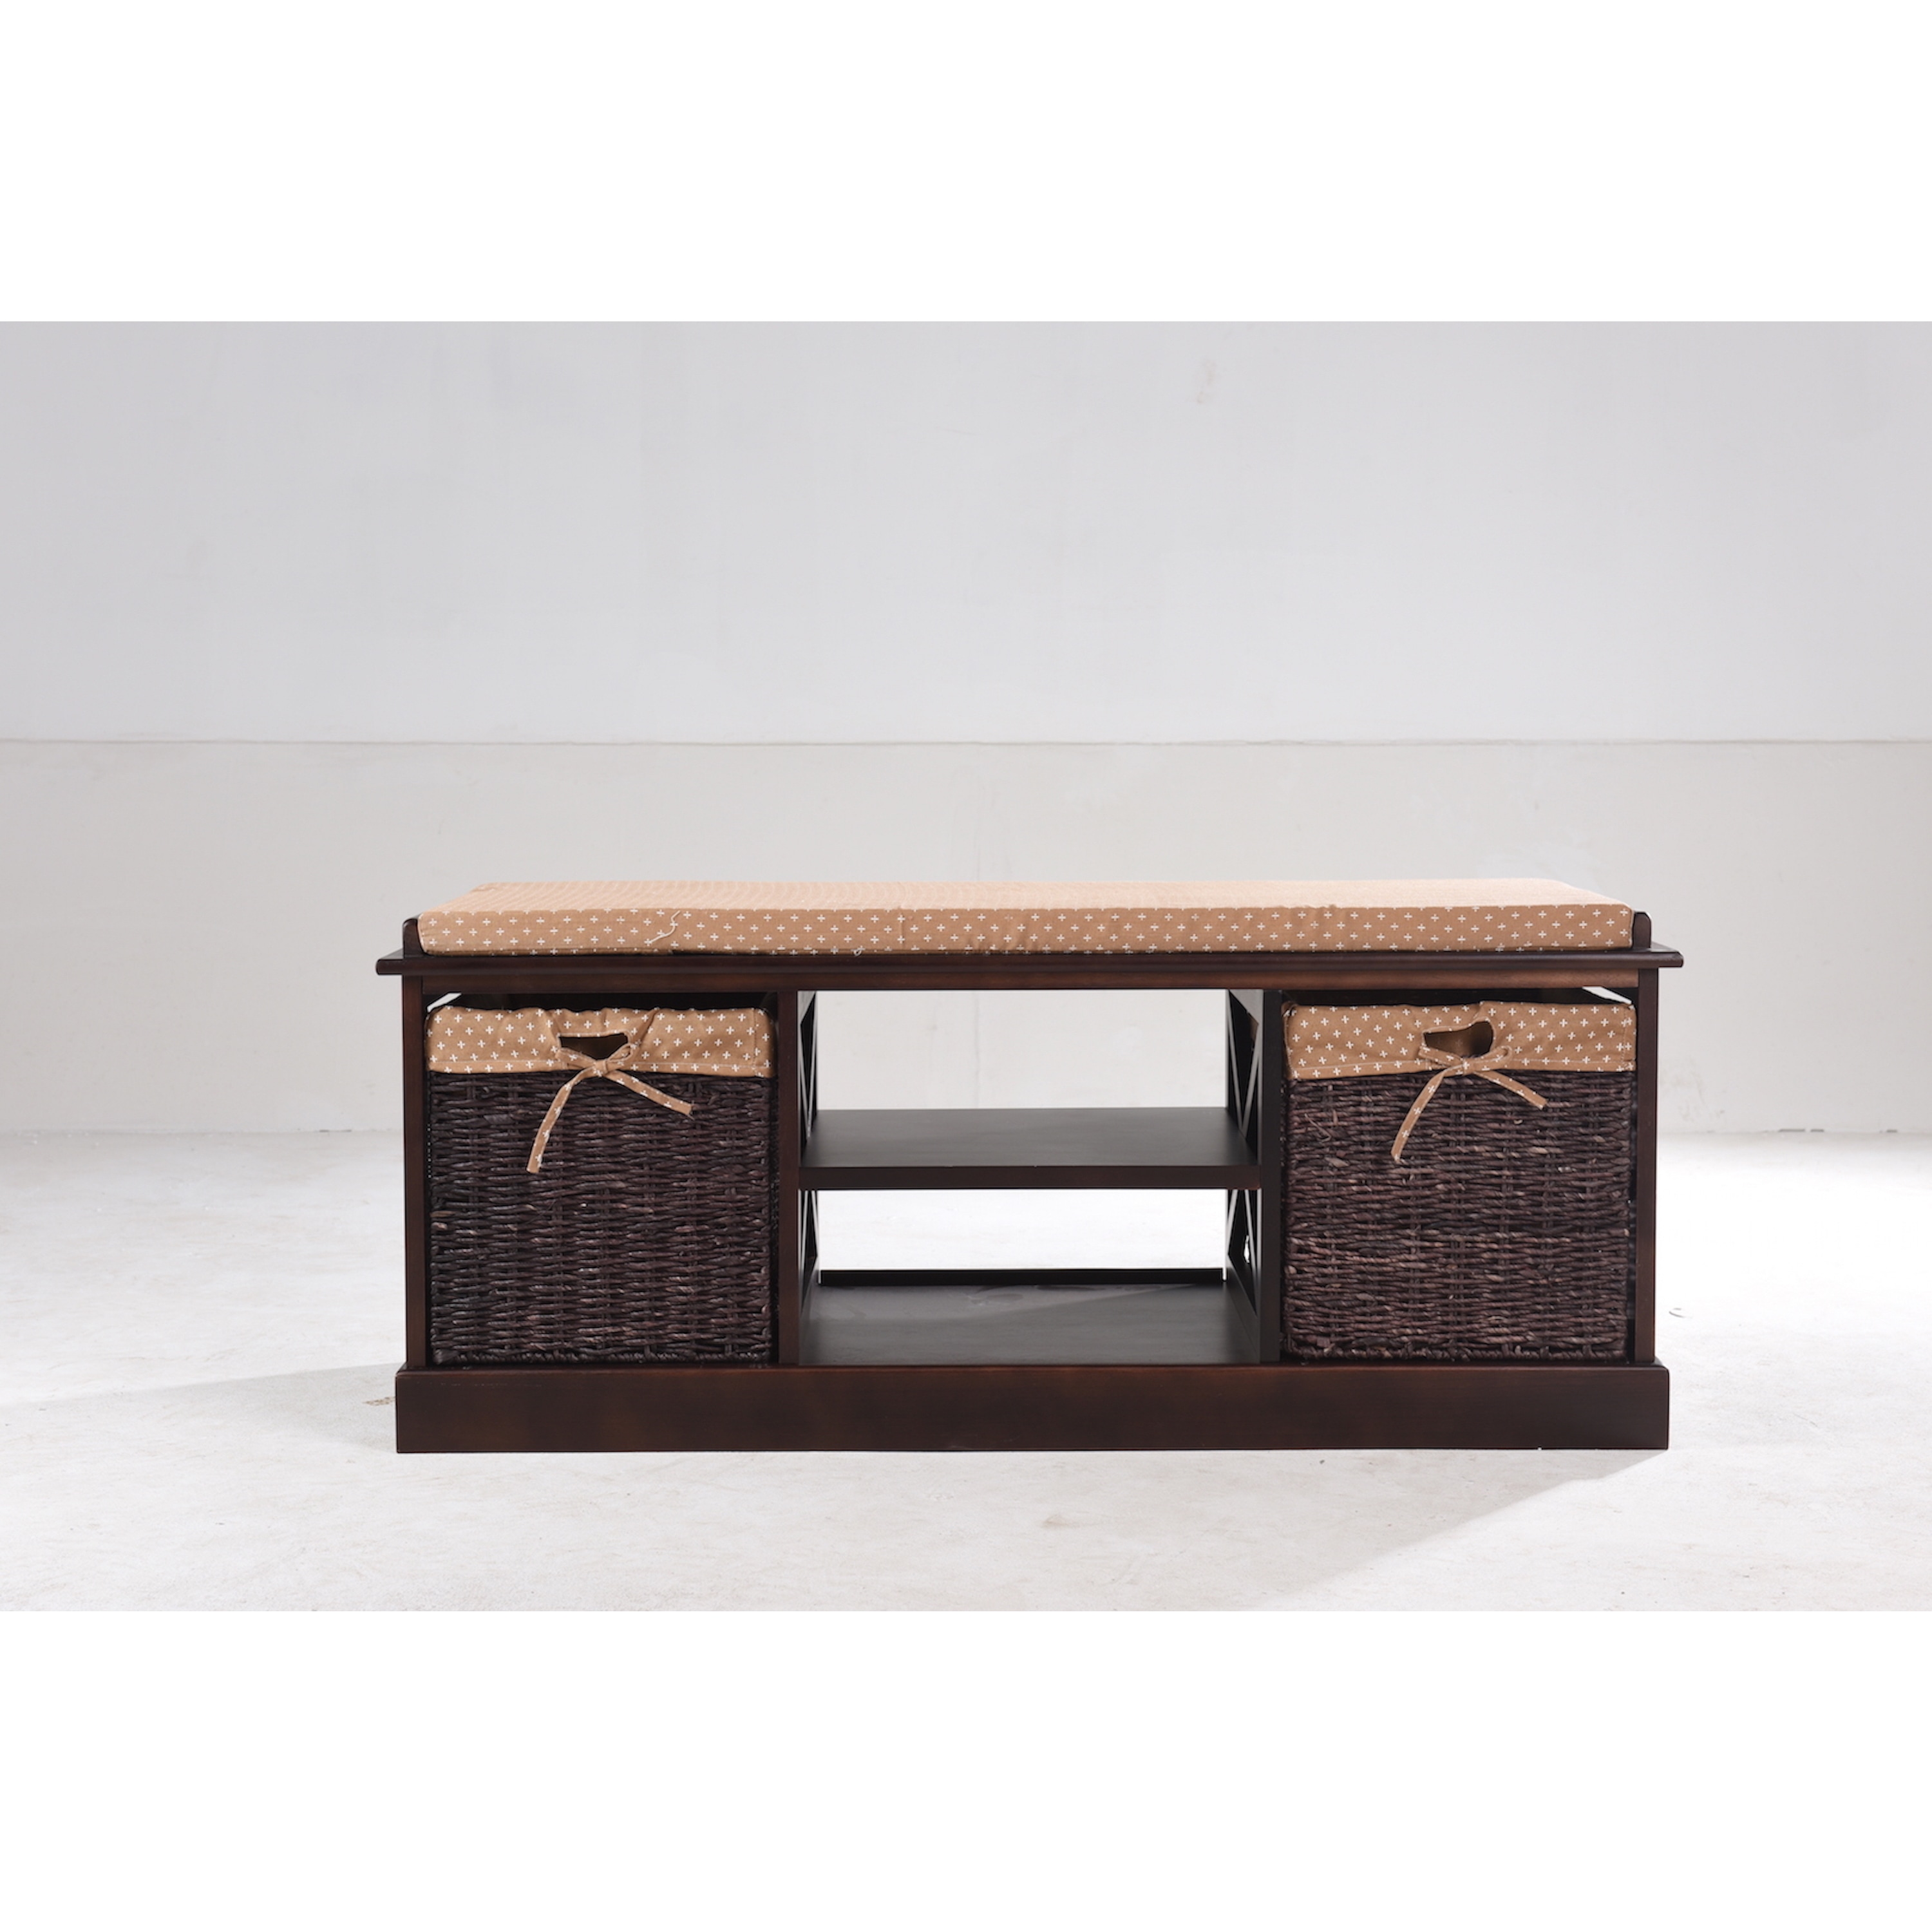 Greenville Cherry Finish Solid Wood And Mdf Entryway Storage Bench Overstock 13808153